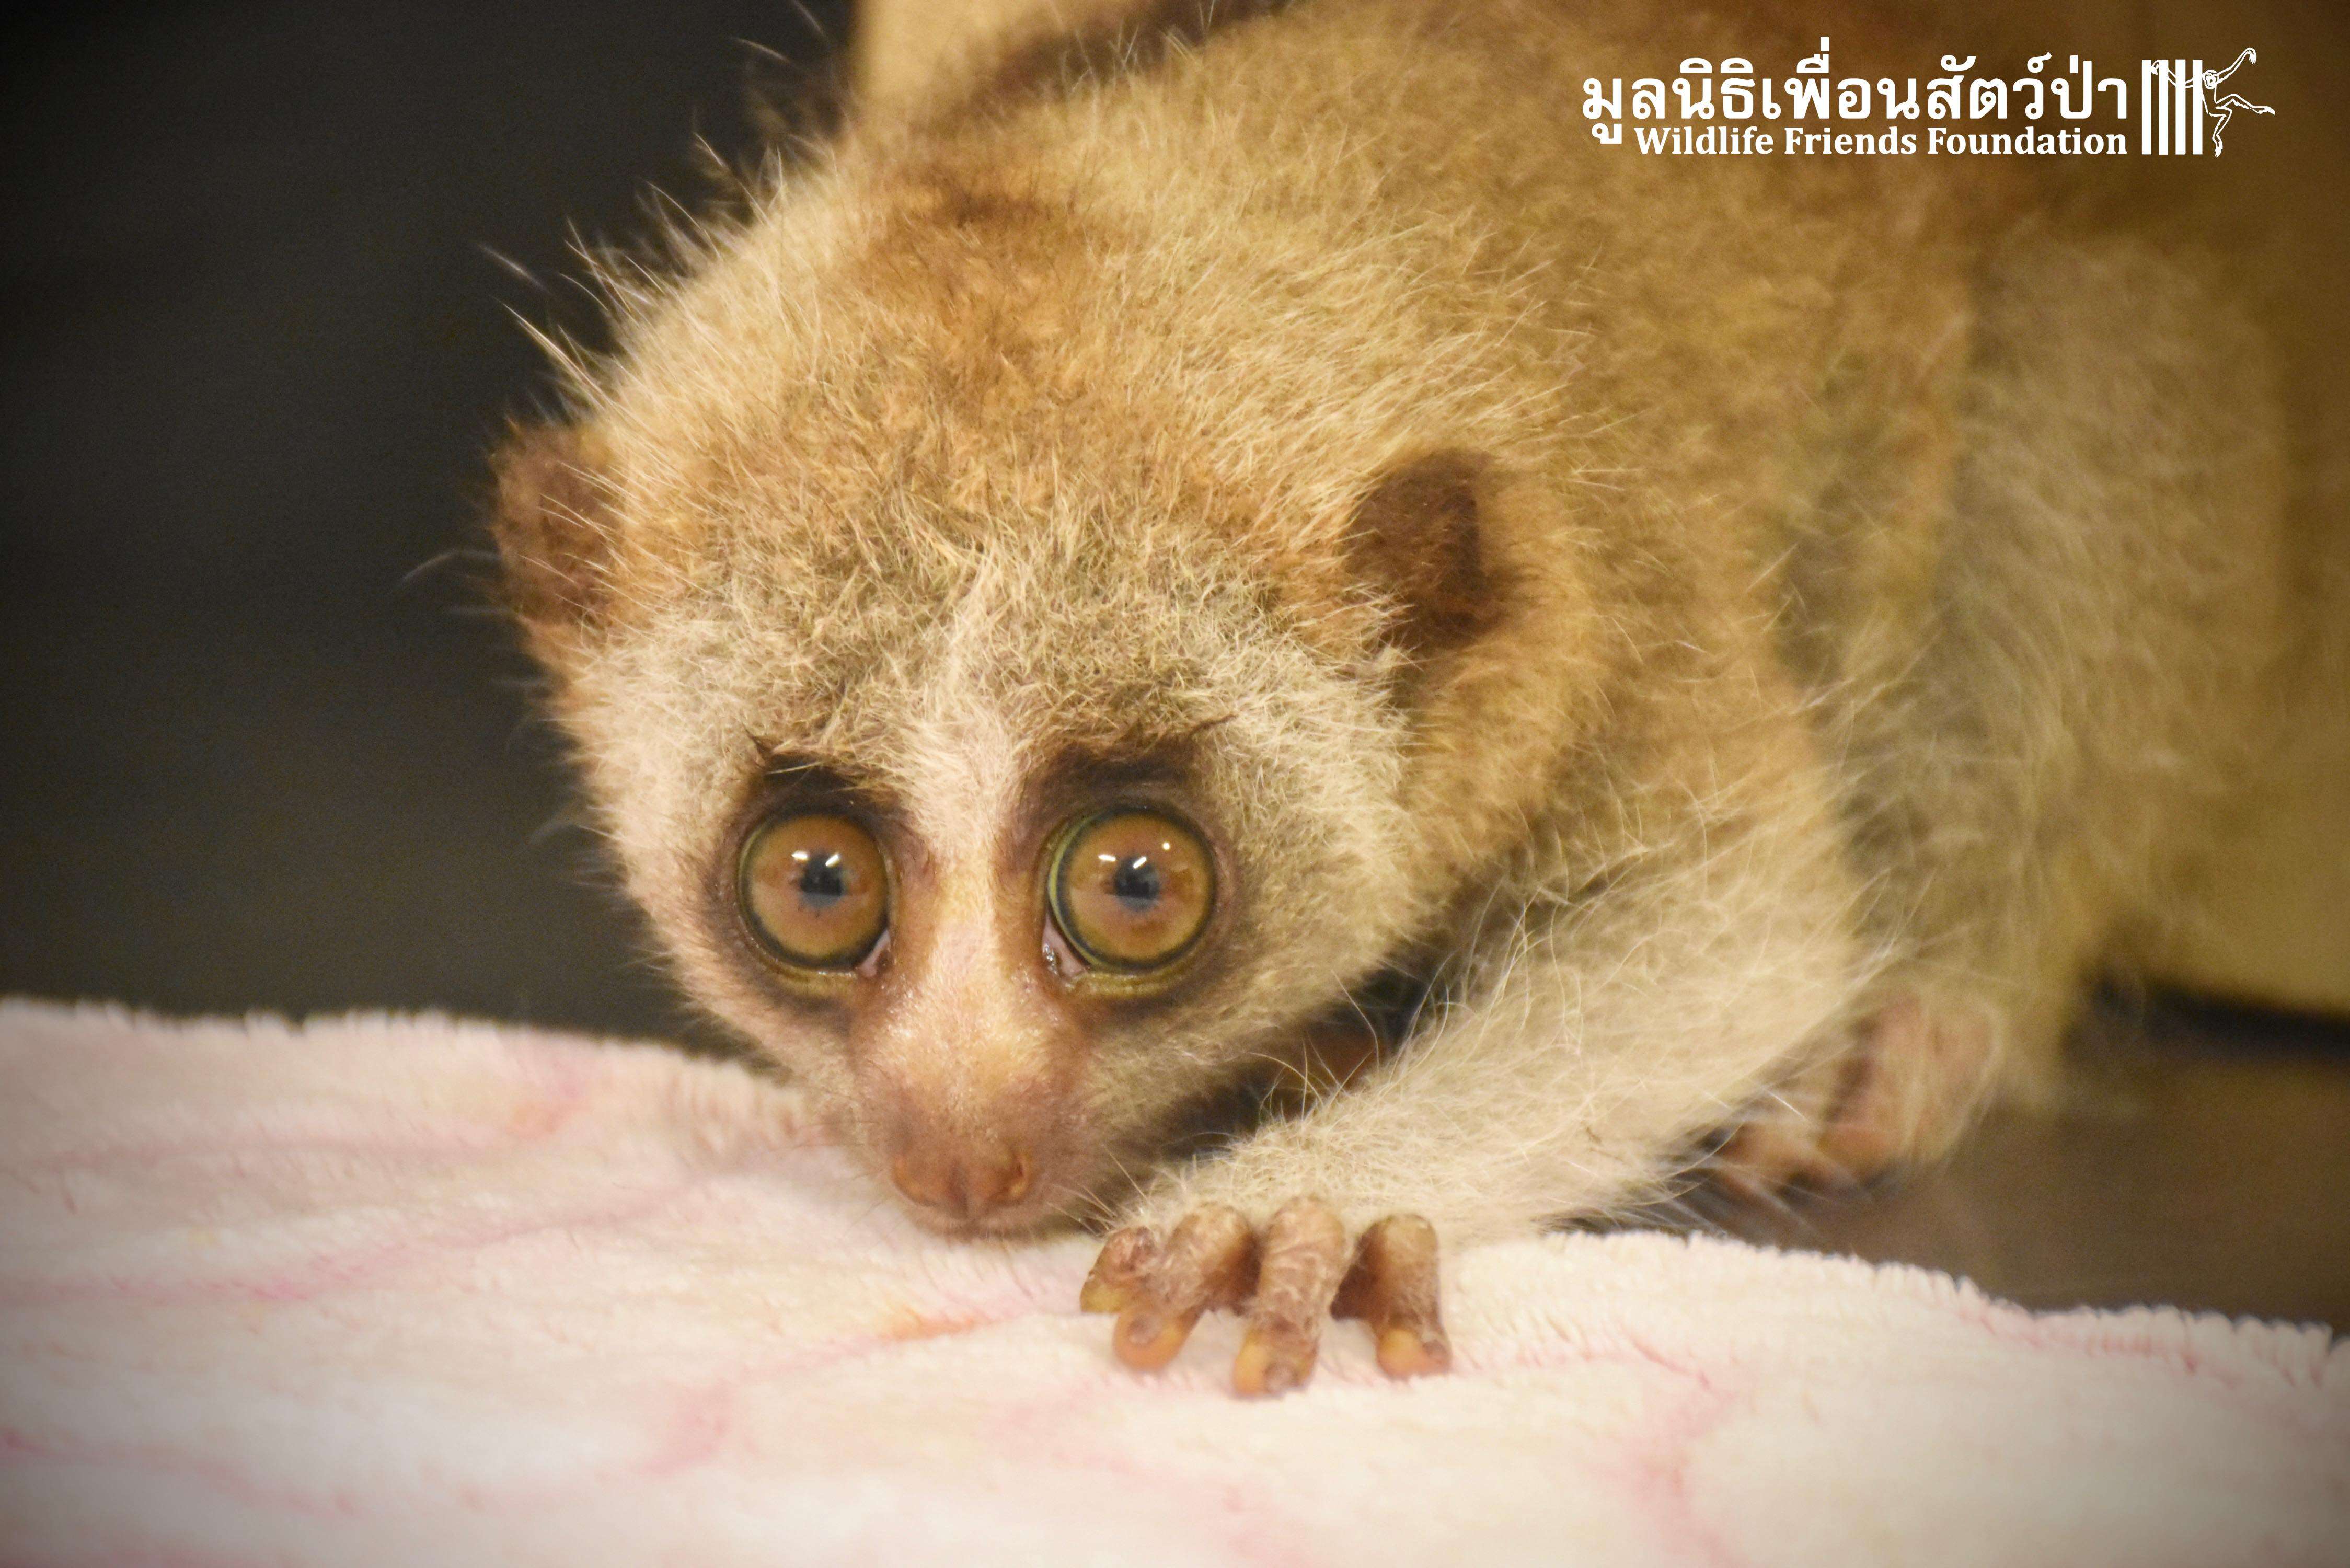 Slow loris saved from Thailand restaurant